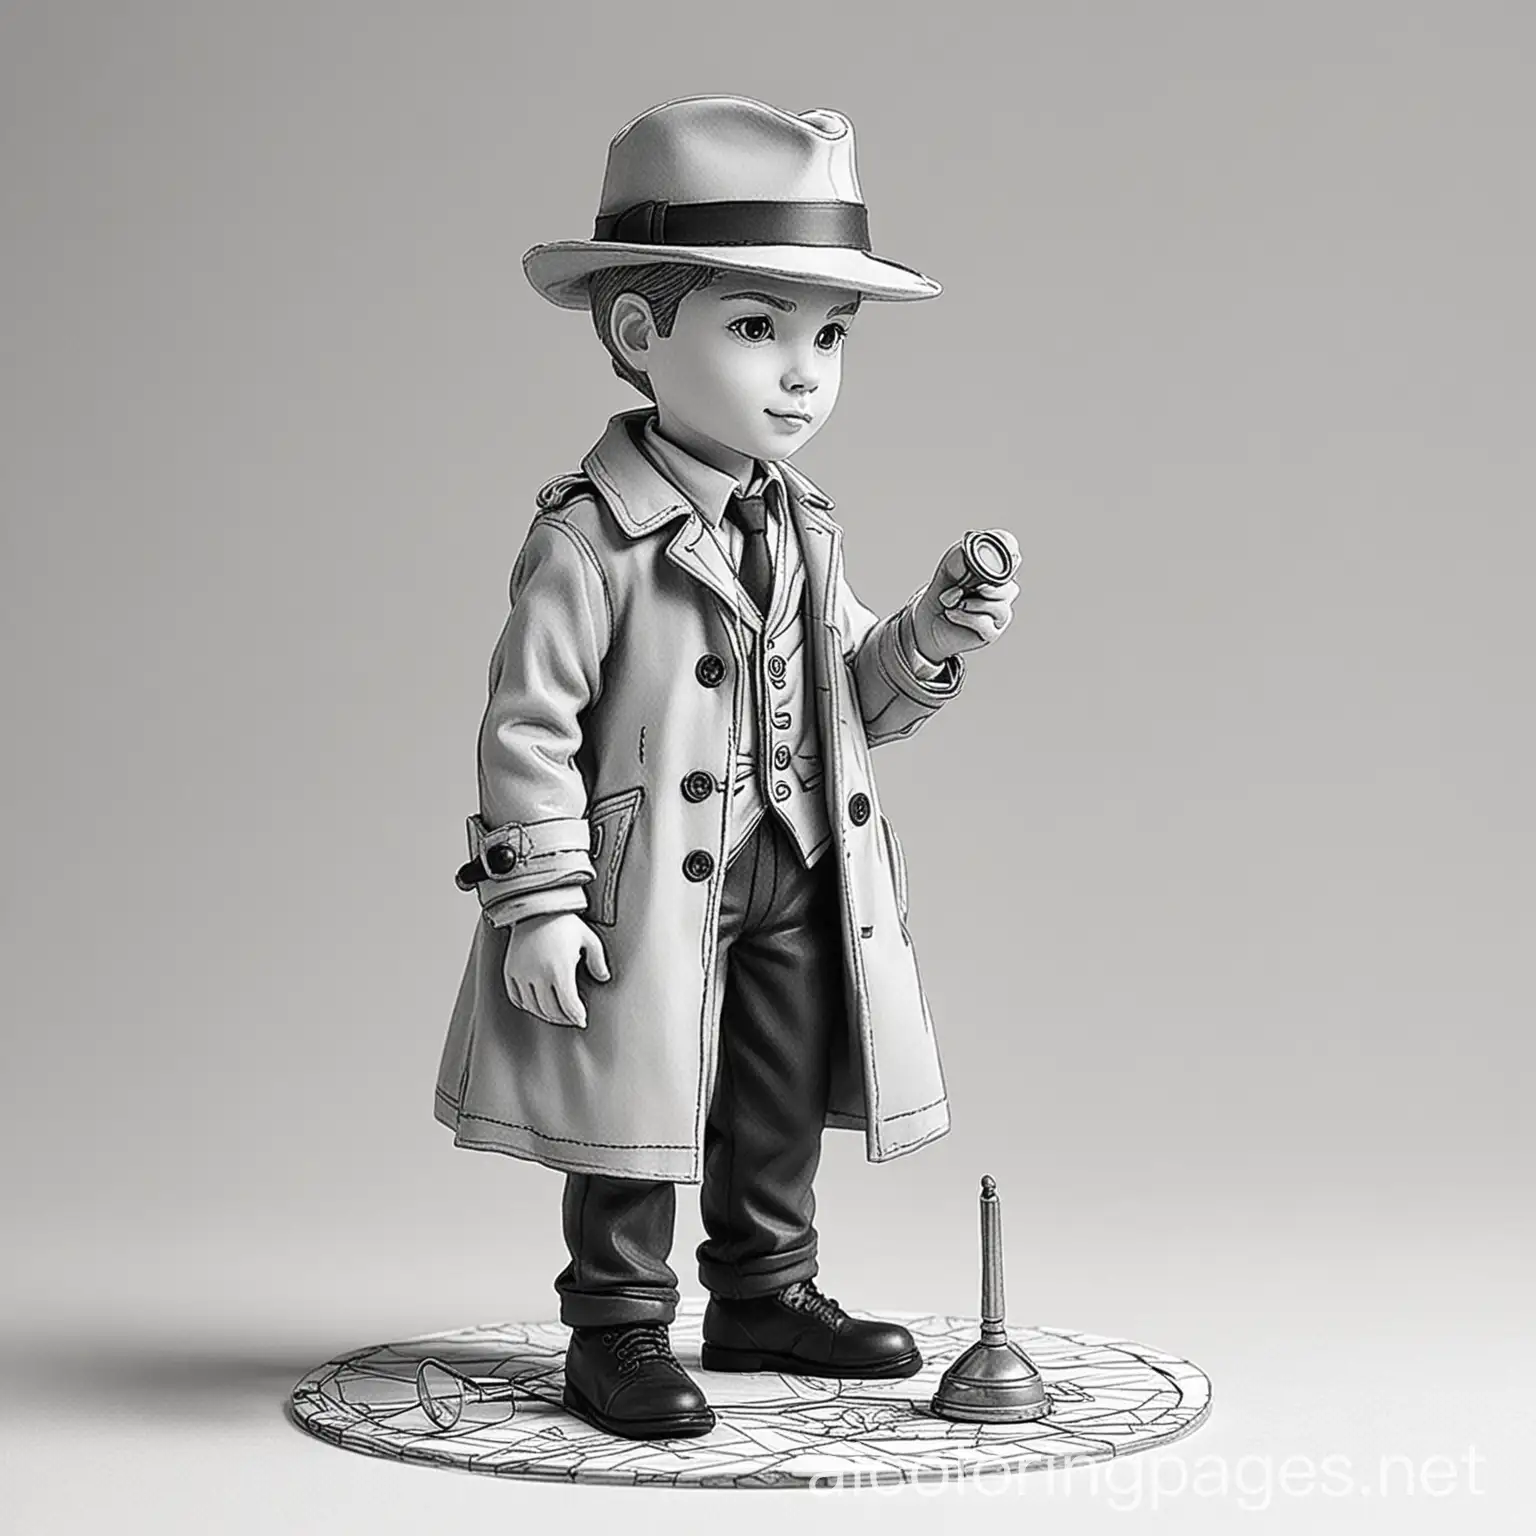 Draw the detective as the central figure. Show them in a thoughtful pose, kneeling or bending over to inspect clues. Add details such as a detective hat, trench coat, and a magnifying glass in their hand. Colouring Page, black and white, line art, white background, Simplicity, Ample White Space. The background of the colouring page is plain white to make it easy for young children to colour within the lines. The outlines of all the subjects are easy to distinguish, making it simple for kids to colour without too much difficulty.